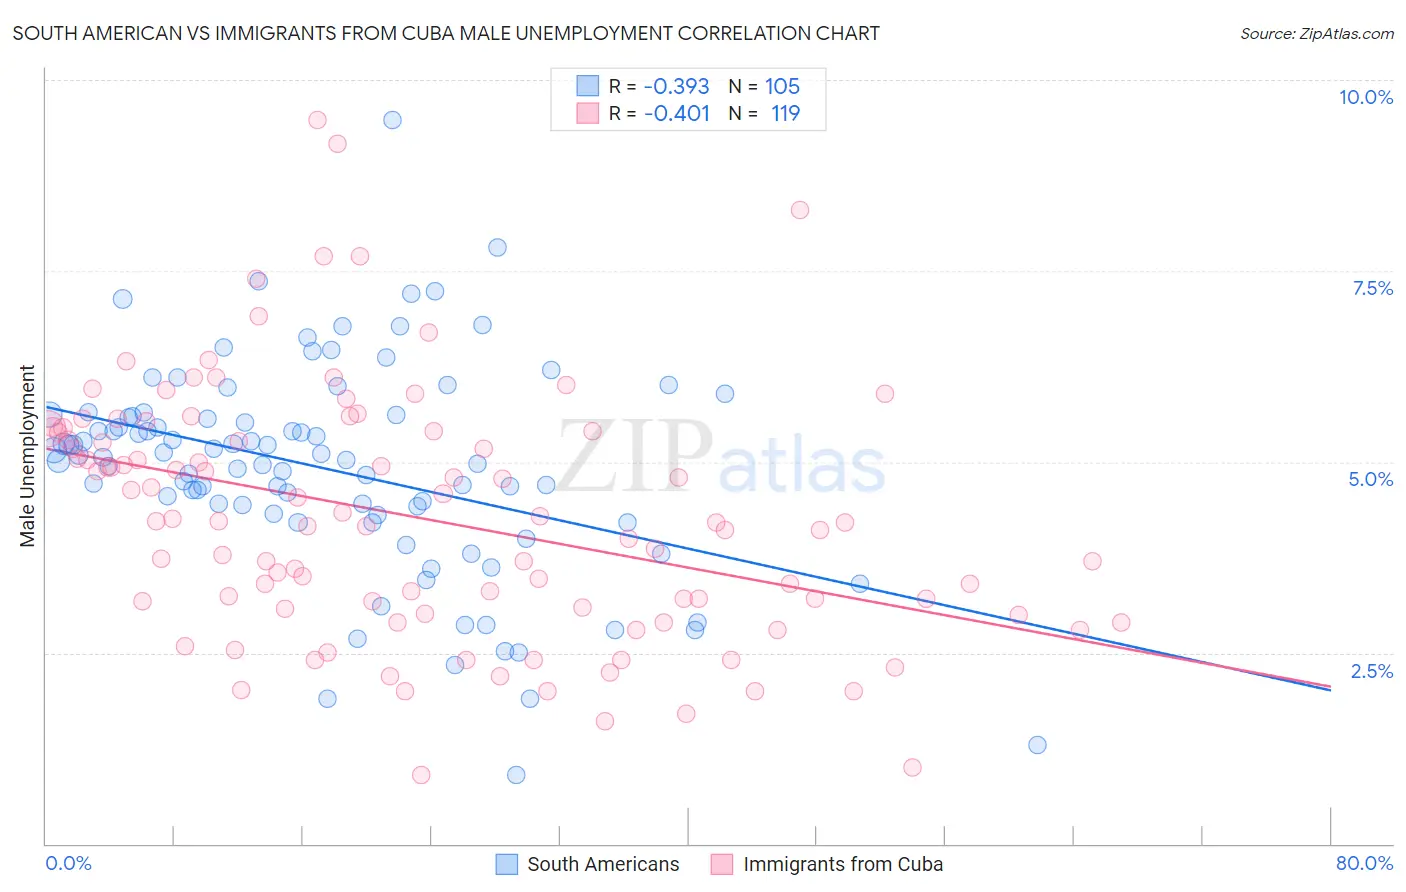 South American vs Immigrants from Cuba Male Unemployment